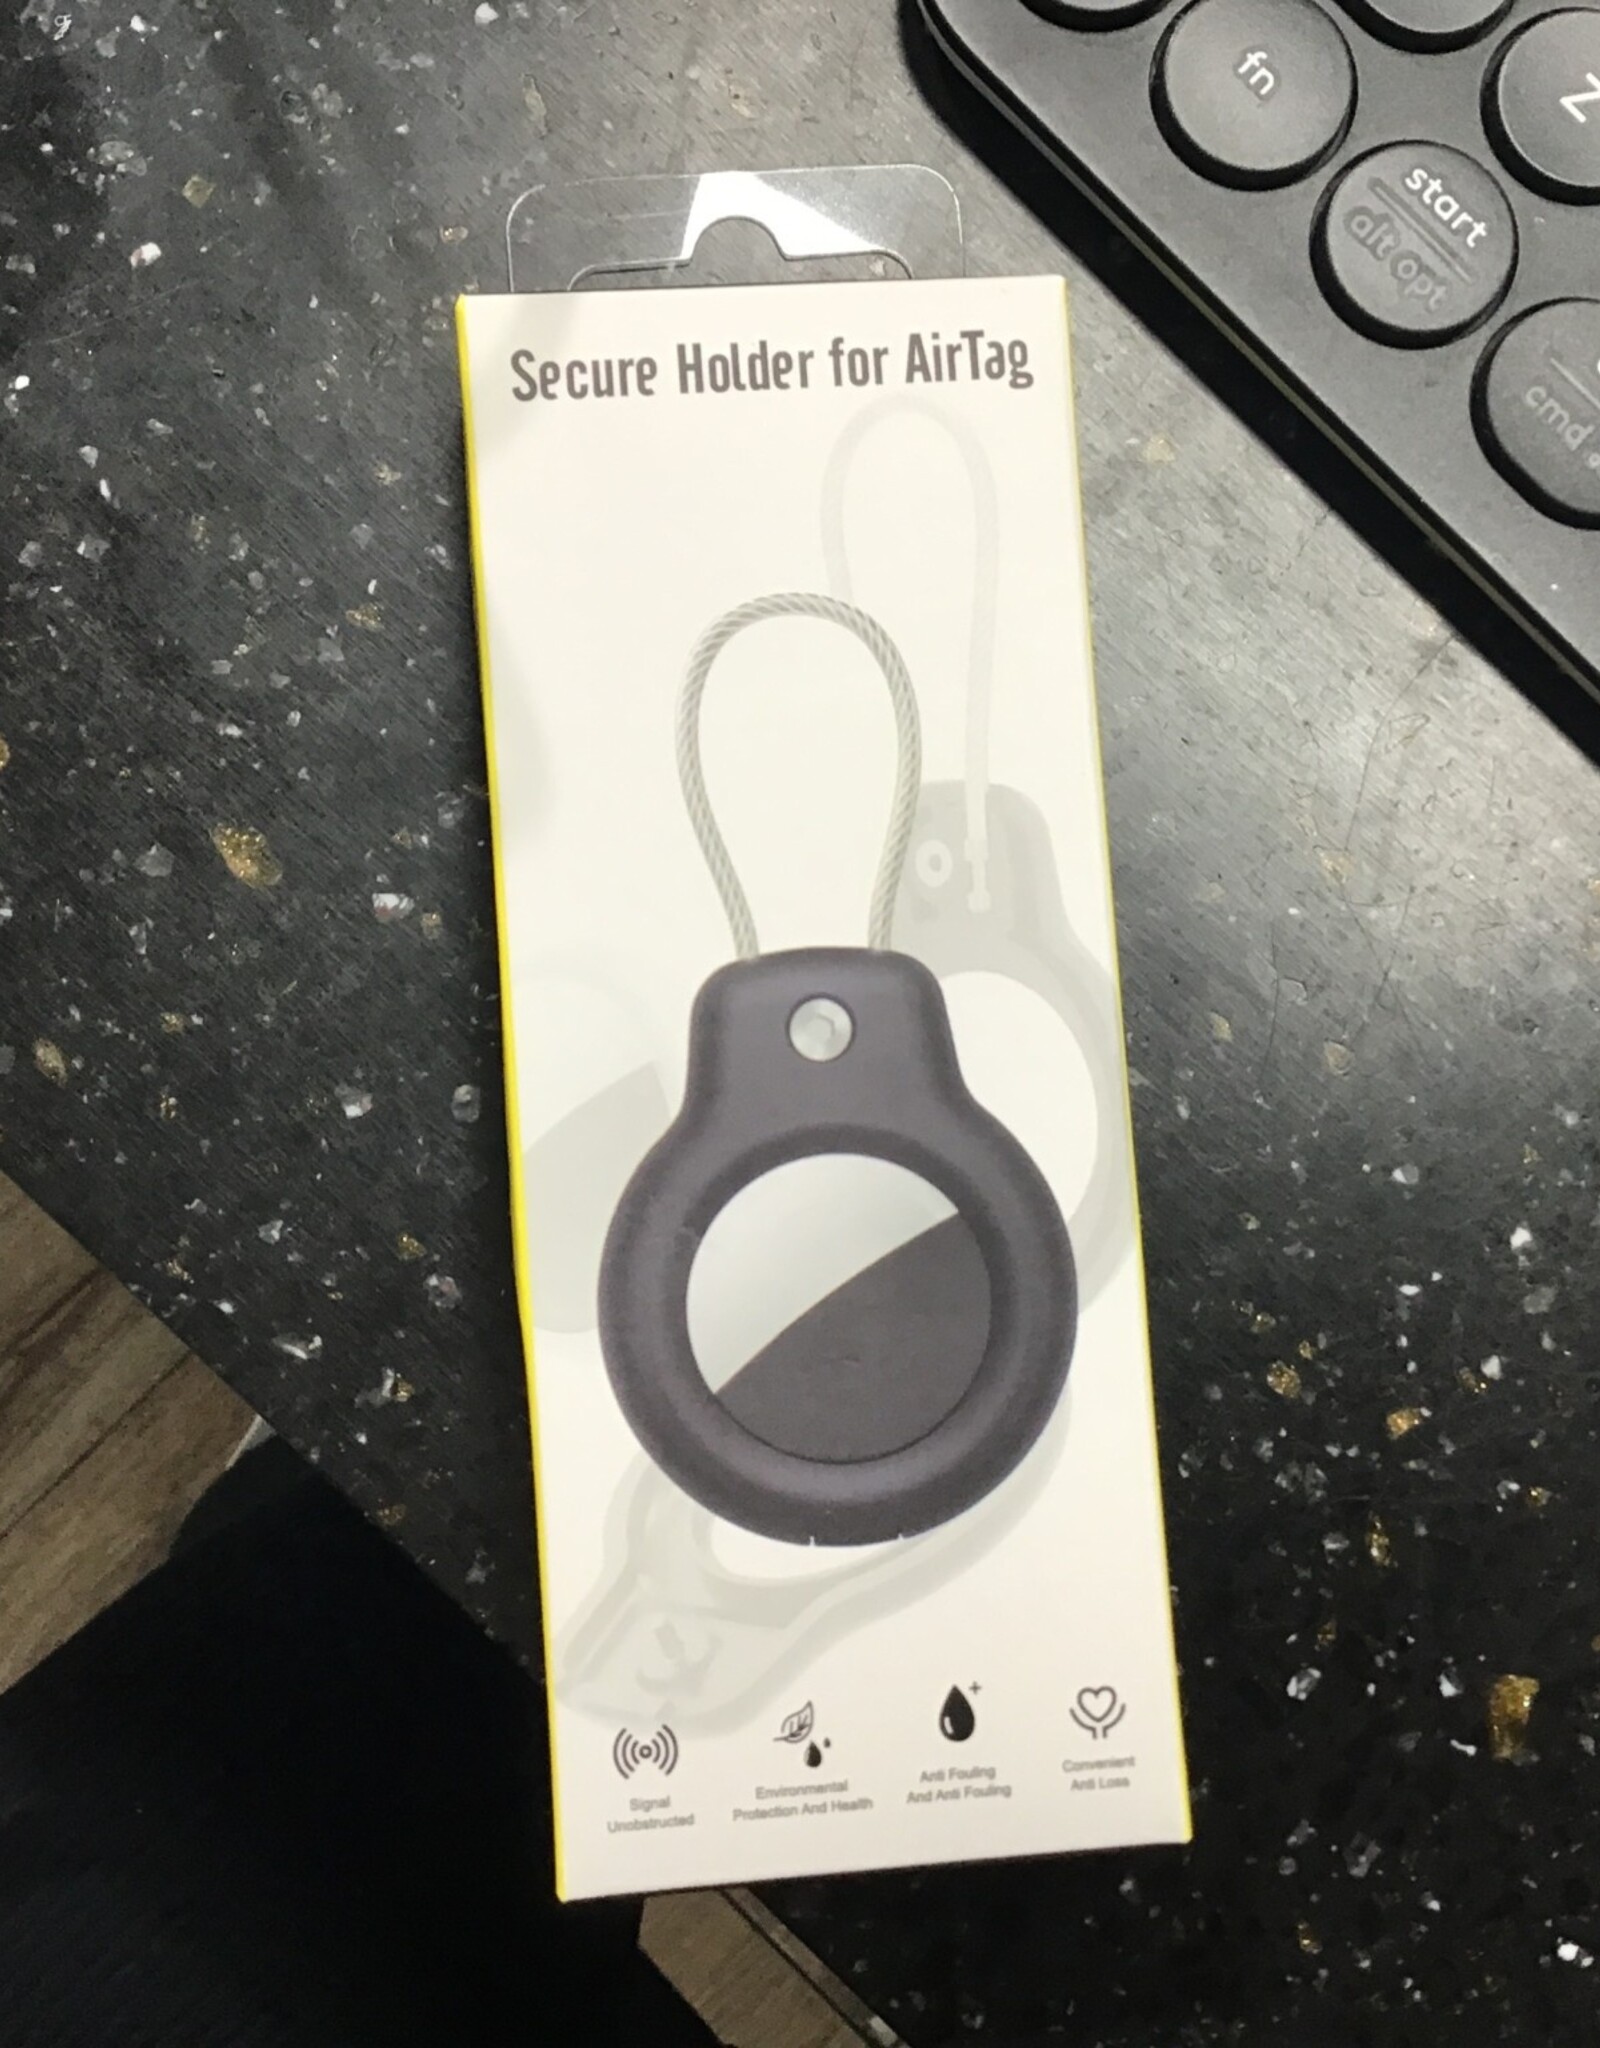 Secure Holder for AirTag